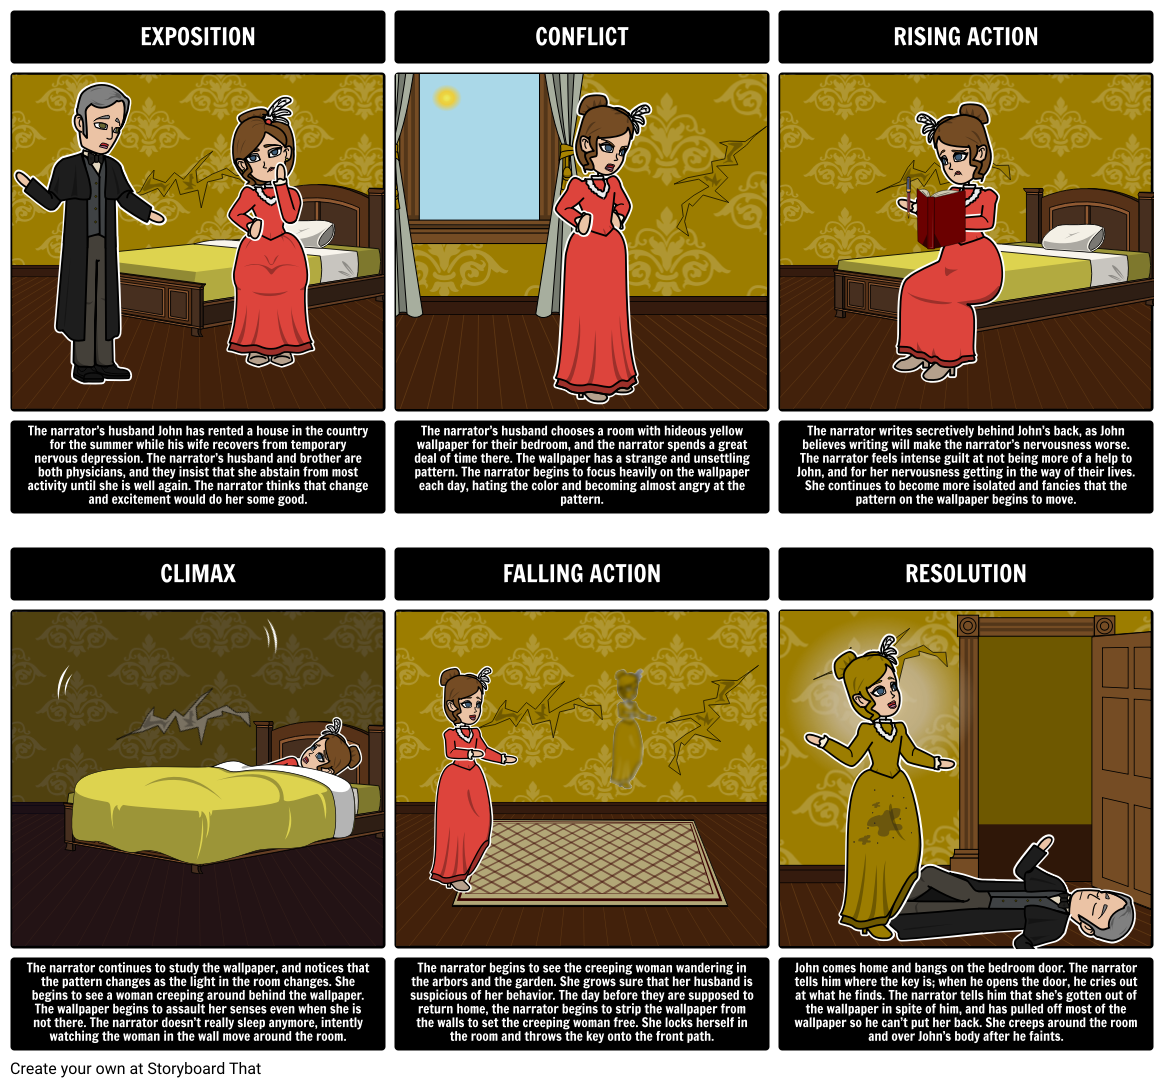 character analysis on the yellow wallpaper